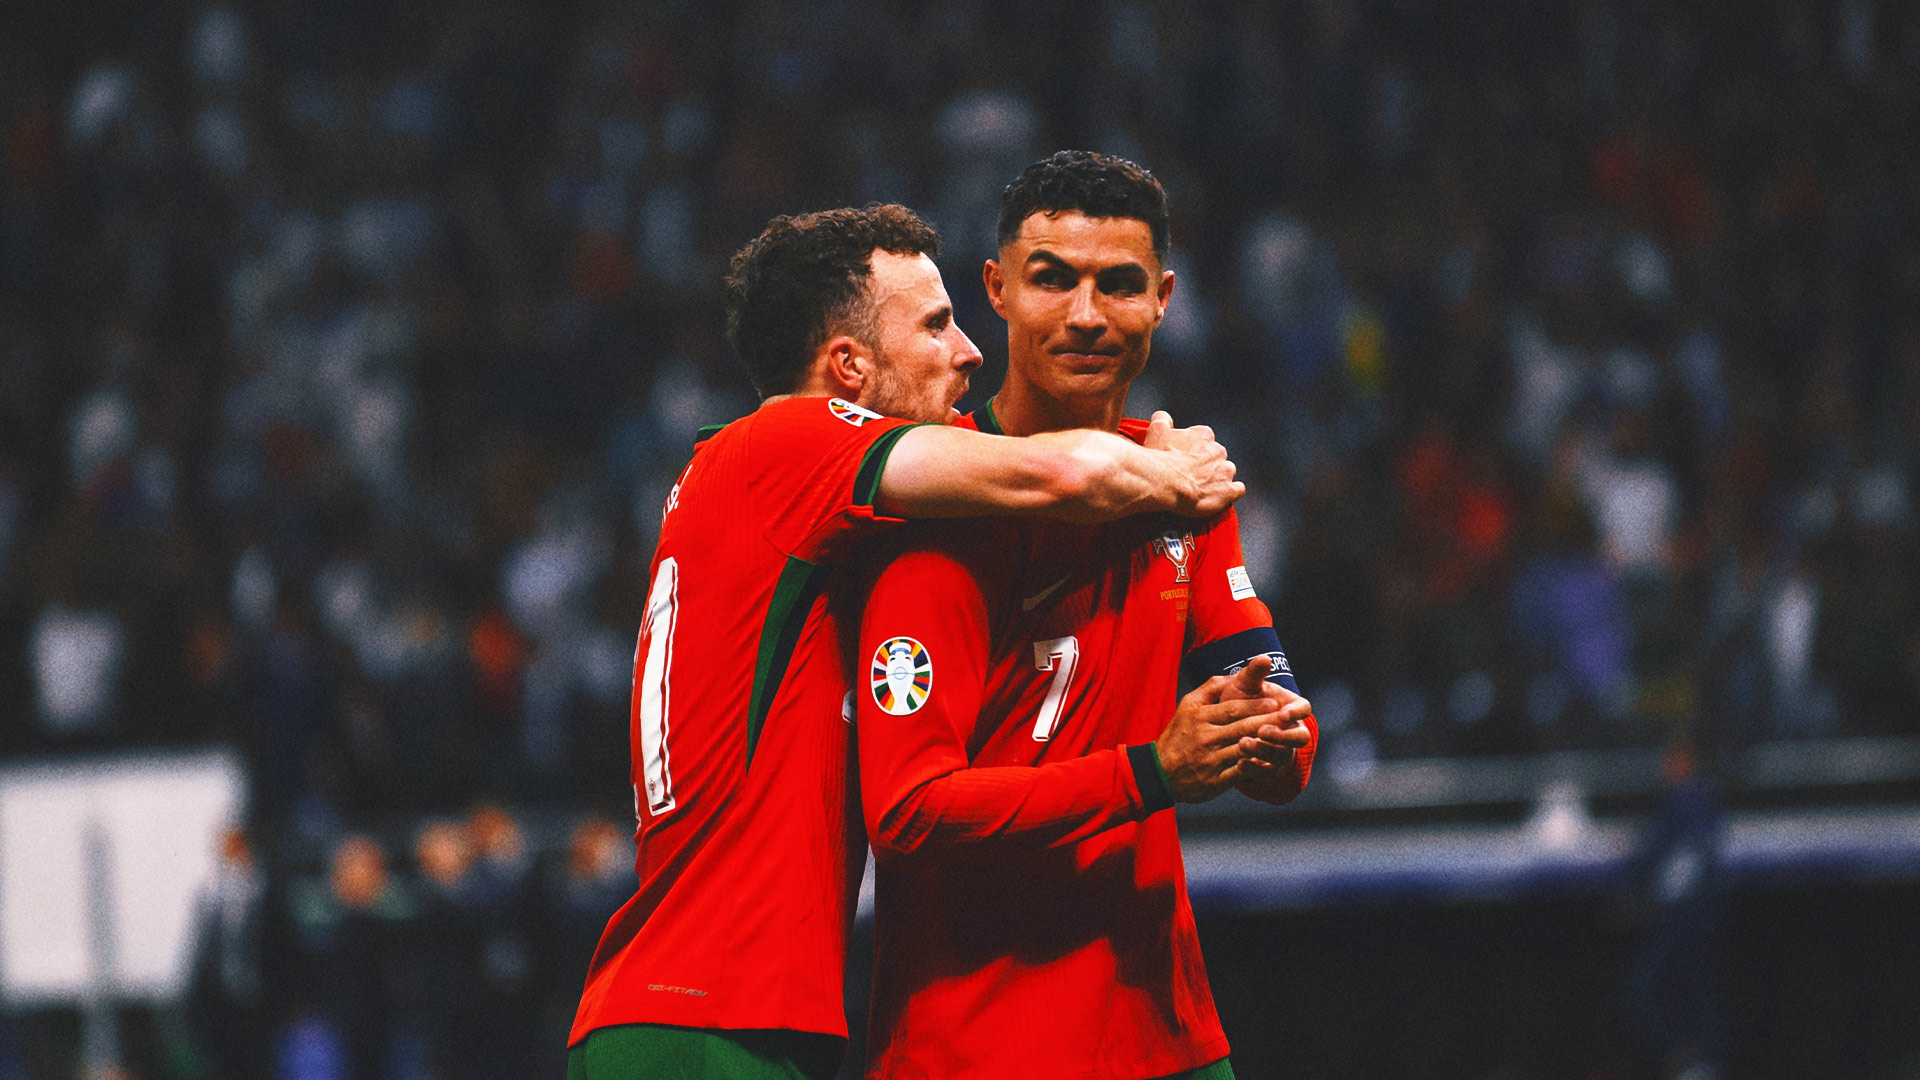 Is Portugal relying on Cristiano Ronaldo too much?